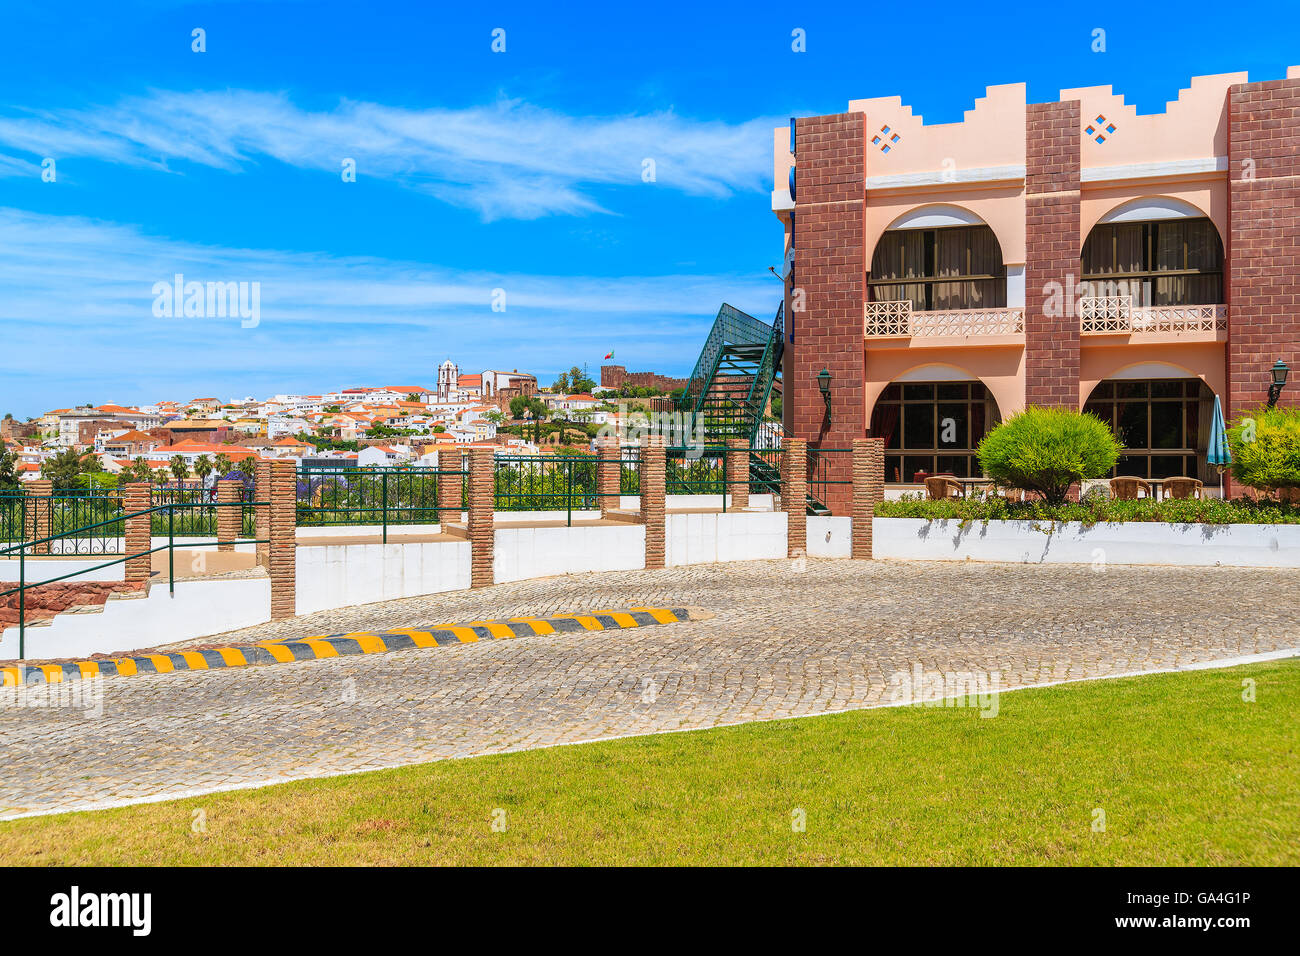 A view of Silves town and hotel building, Algarve region, Portugal Stock Photo